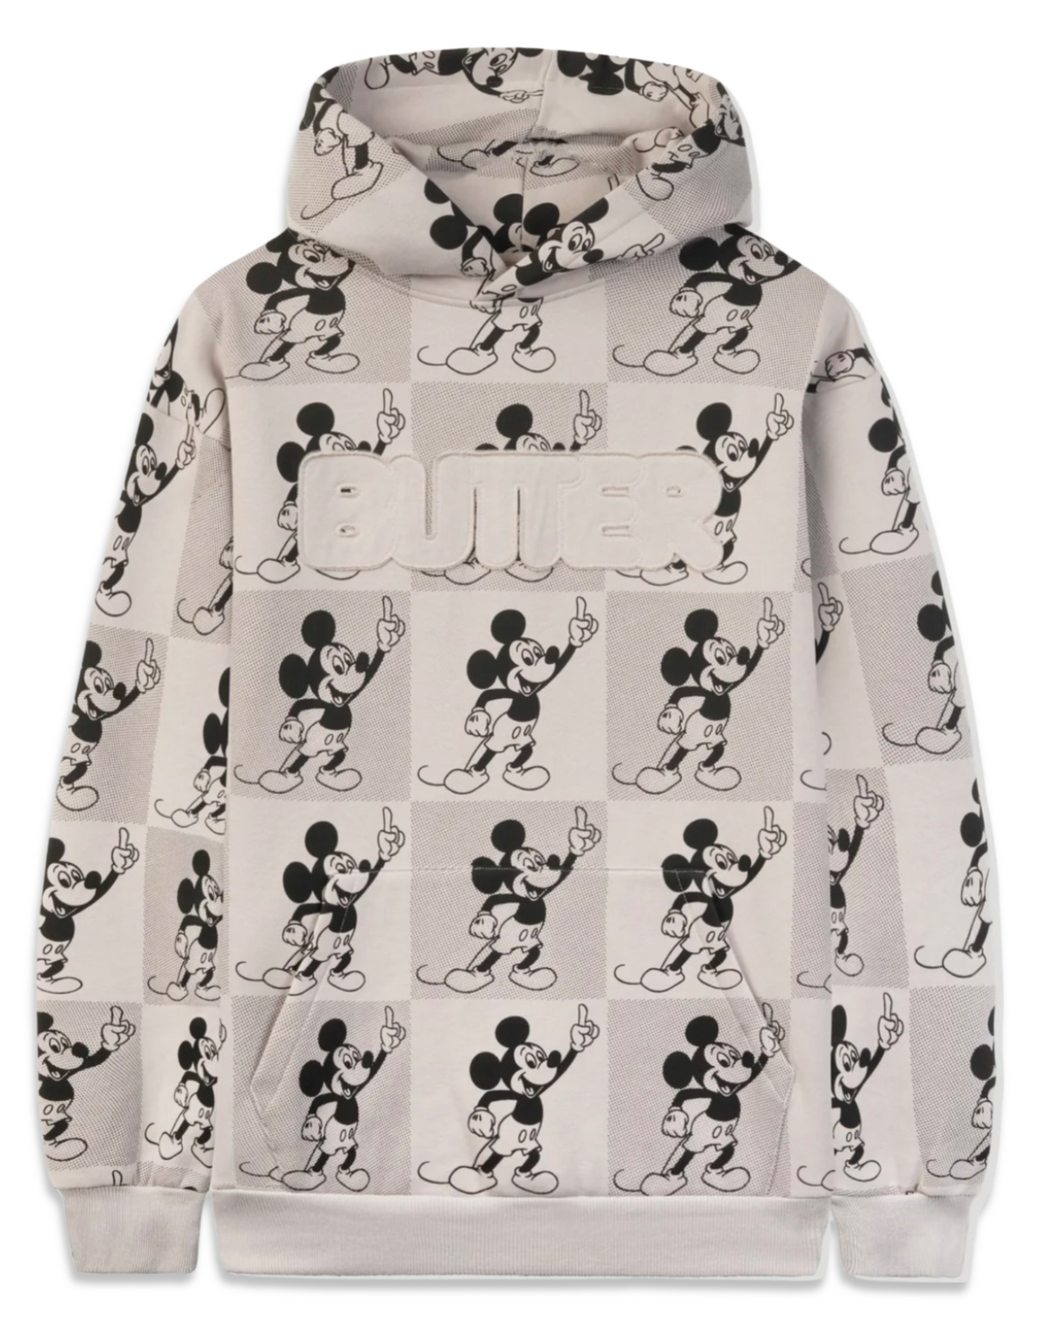 Butter Goods x Disney Mickey Mouse Halftone Hoodie in Cement ⏐ Size XL